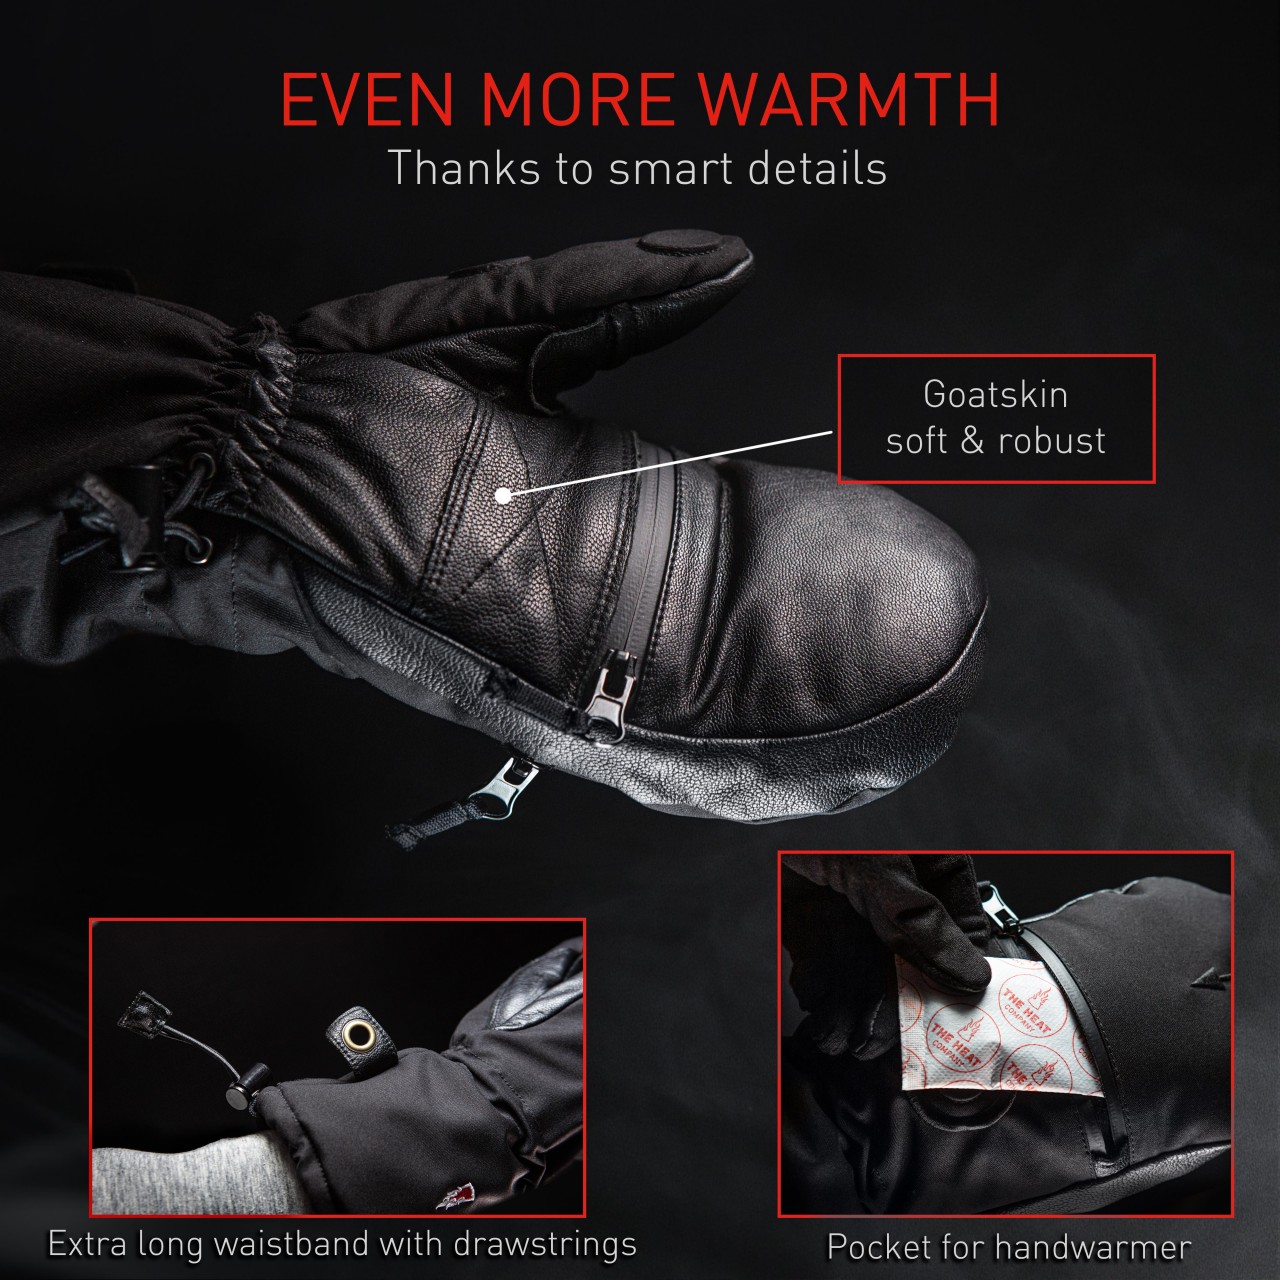 SHELL gloves and handwarmers by THE HEAT COMPANY